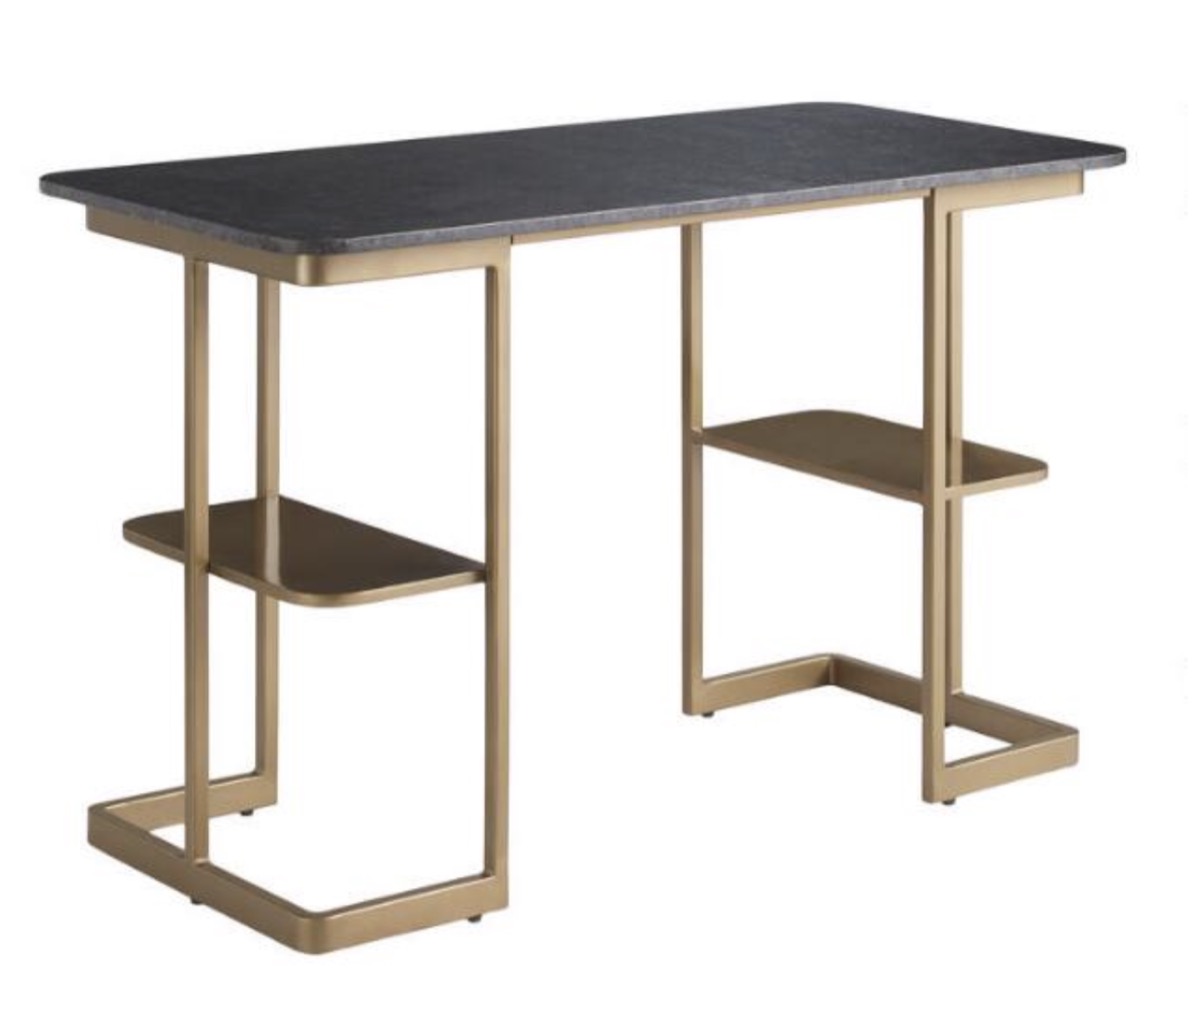 gold '60s inspired desk with black granite top from World Market